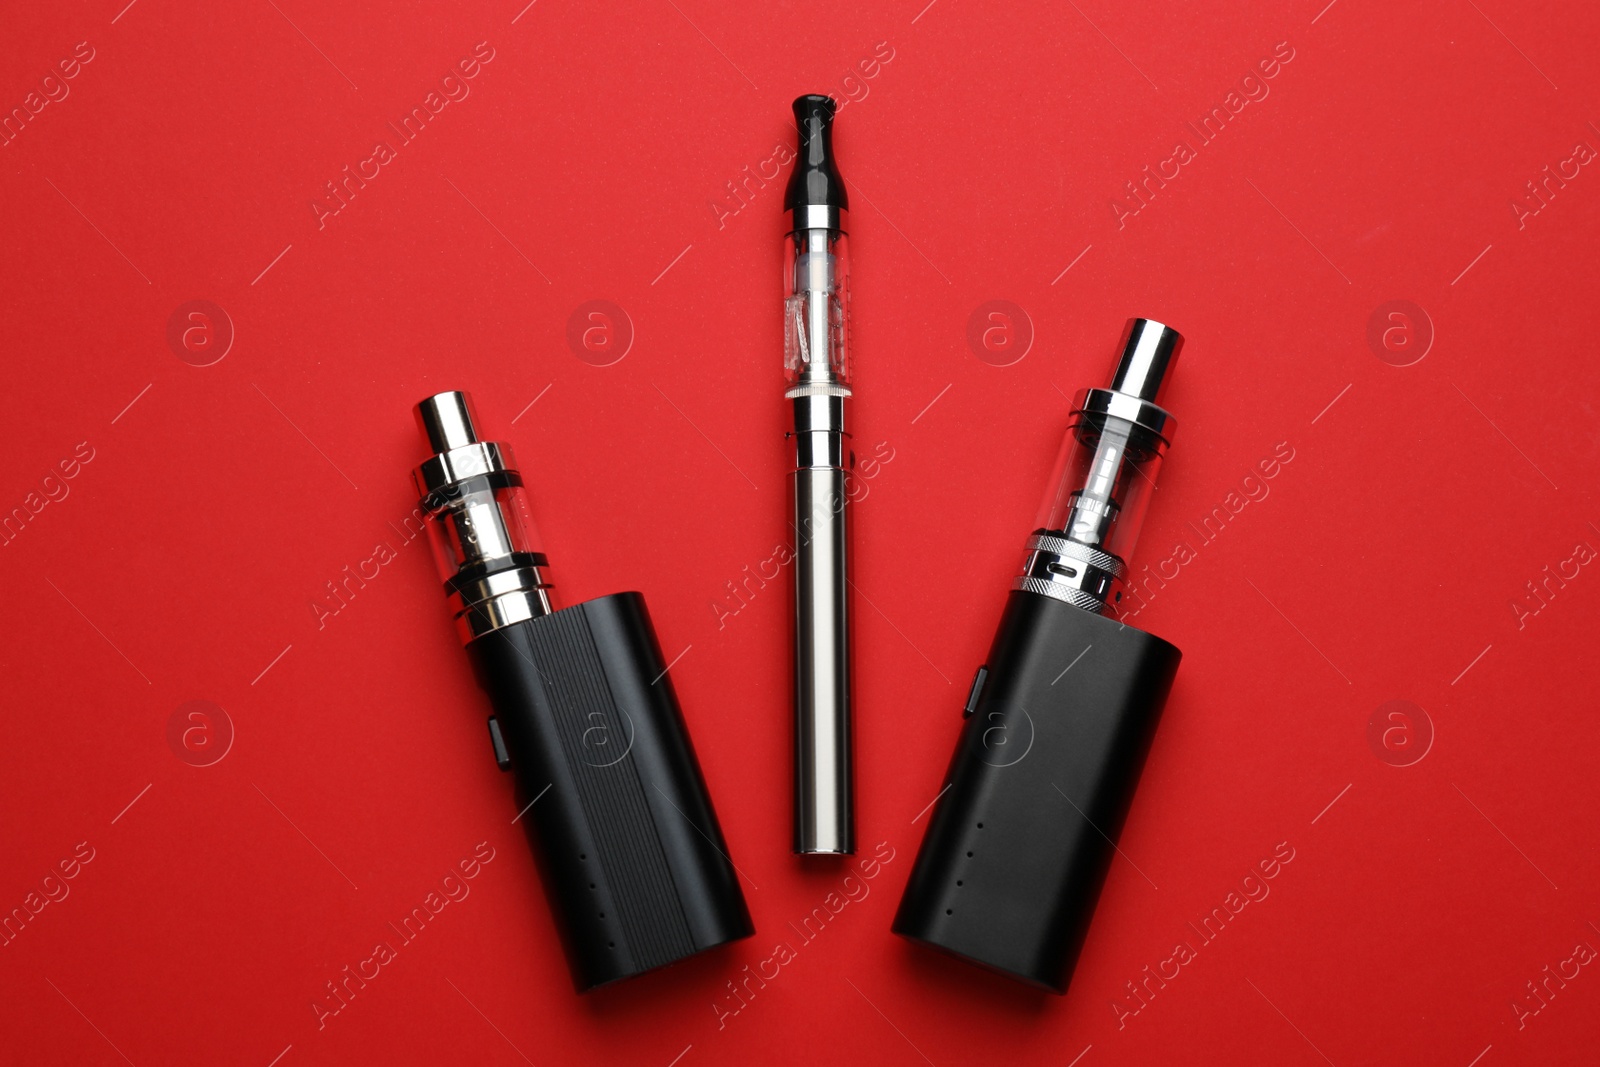 Photo of Electronic smoking devices on red background, flat lay